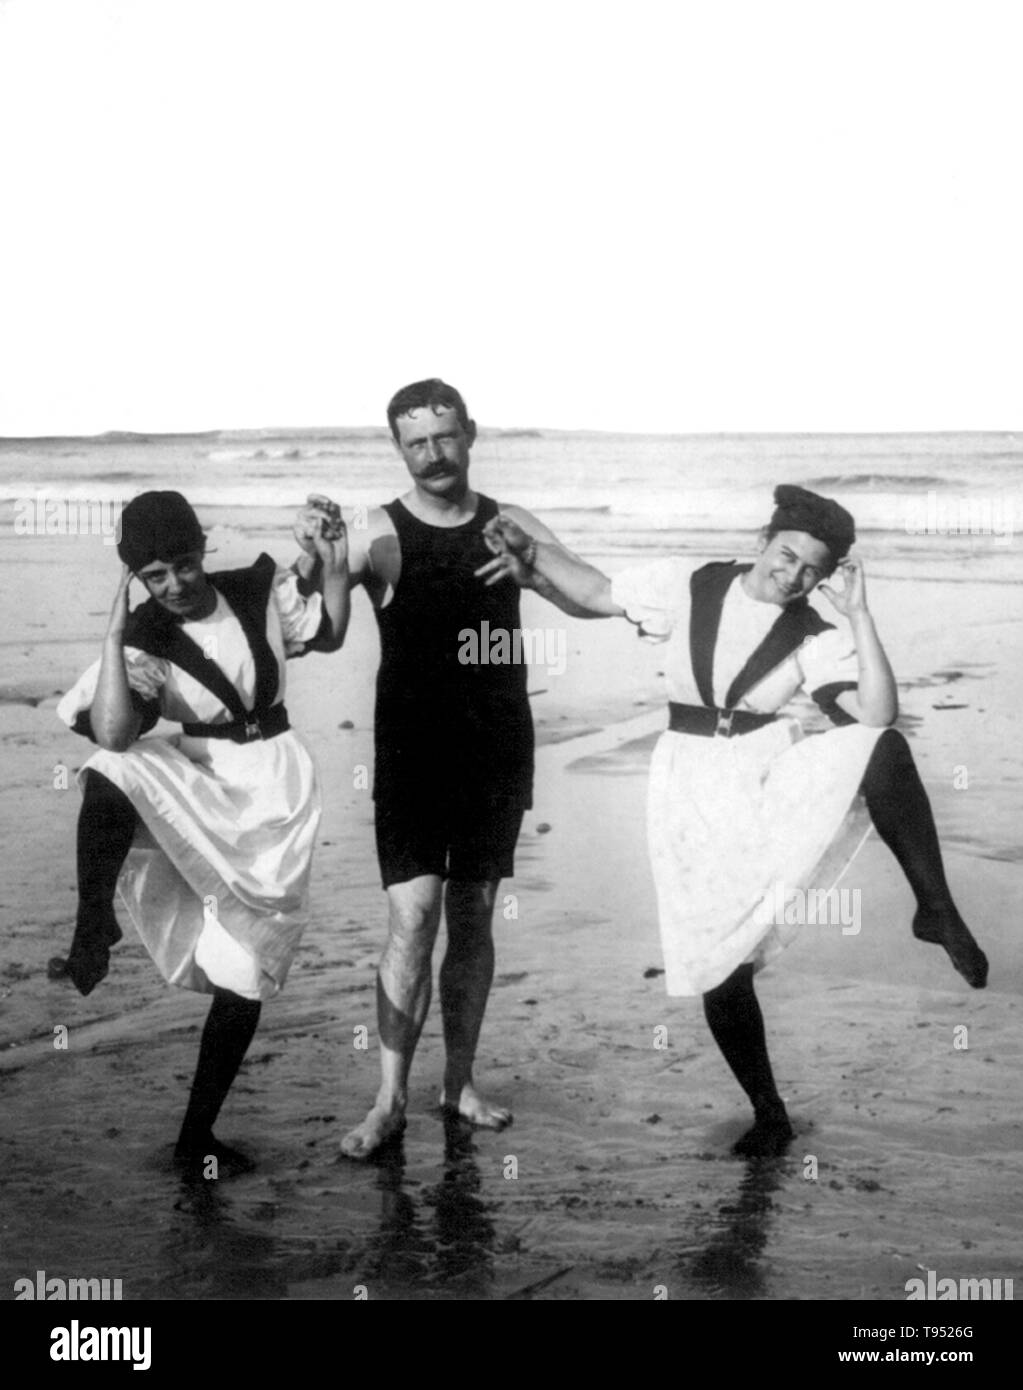 Entitled: 'Bathers' two women and one man wearing bathing suits doing funny pose on beach. Photographed by W.B. Davidson, 1897. Stock Photo